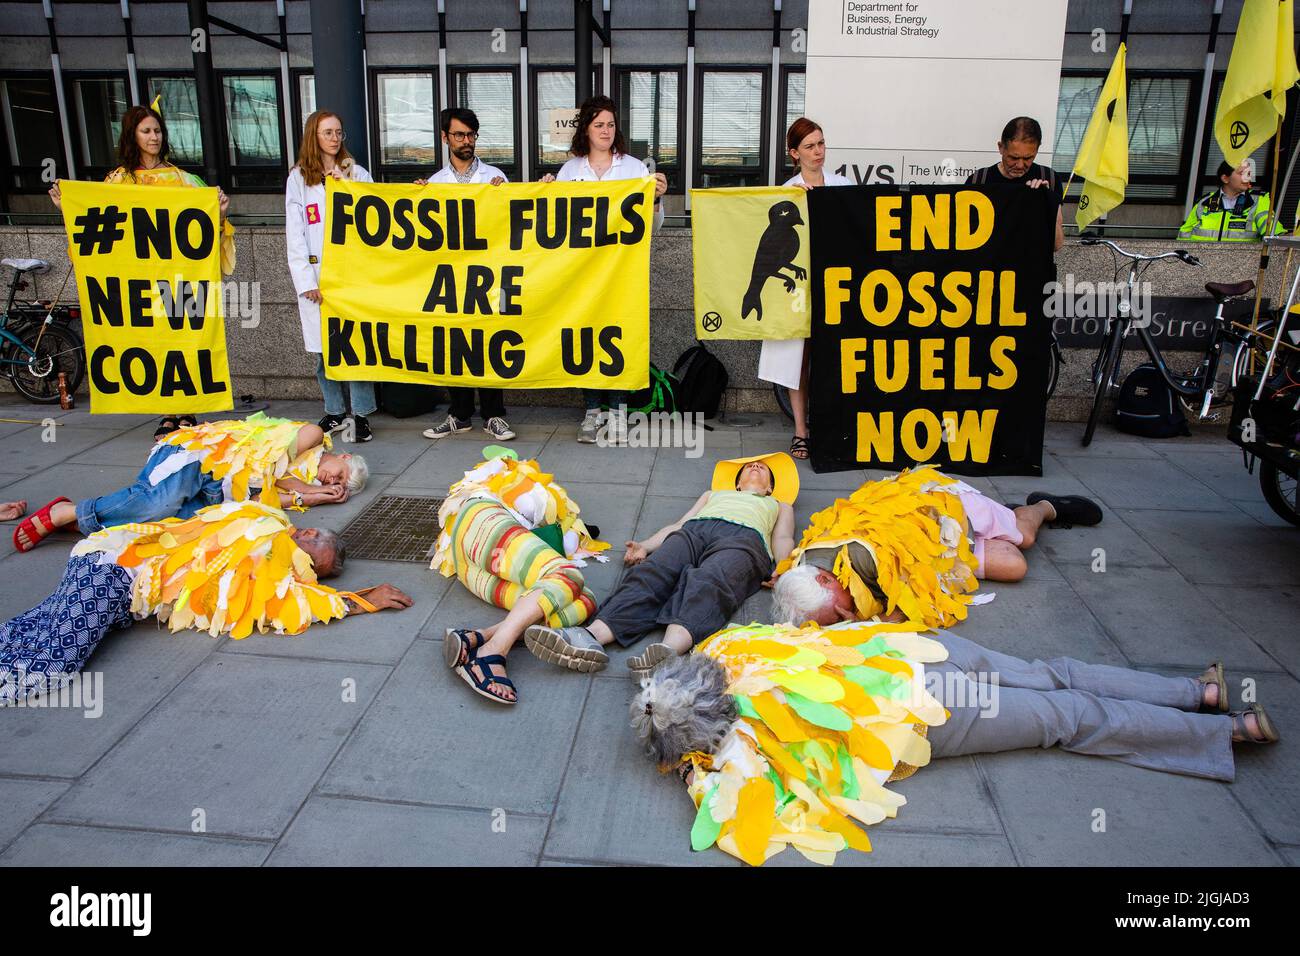 London, UK. 11th July, 2022. Climate activists from Extinction Rebellion dressed as canaries stage a Stop Coal die-in outside the Department for Business, Energy and Industrial Strategy (BEIS). The activists are calling for no licences or planning consents to be granted for coal extraction by the Coal Authority, an executive non-departmental public body sponsored by BEIS, anywhere in the UK. Credit: Mark Kerrison/Alamy Live News Stock Photo